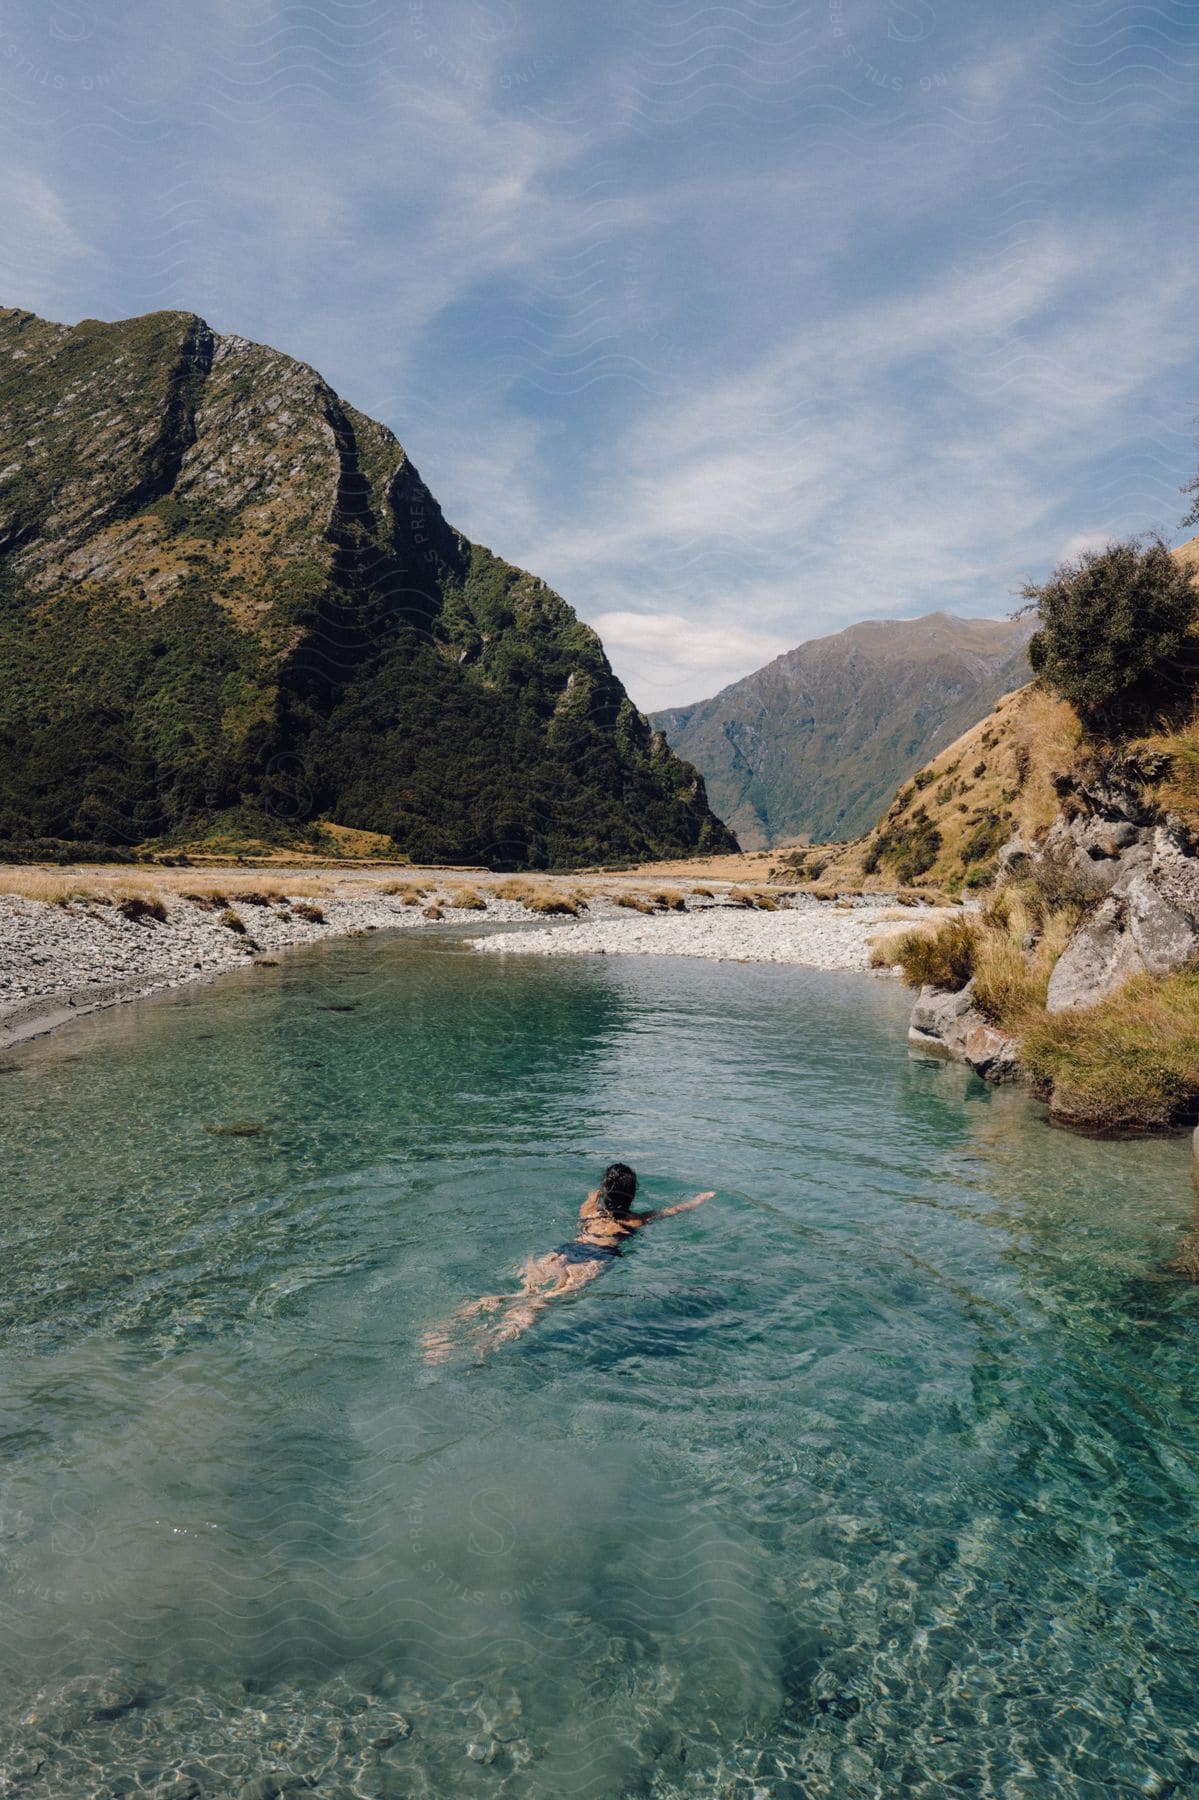 A person swimming in a small lake with crystal clear water in a region with some mountains